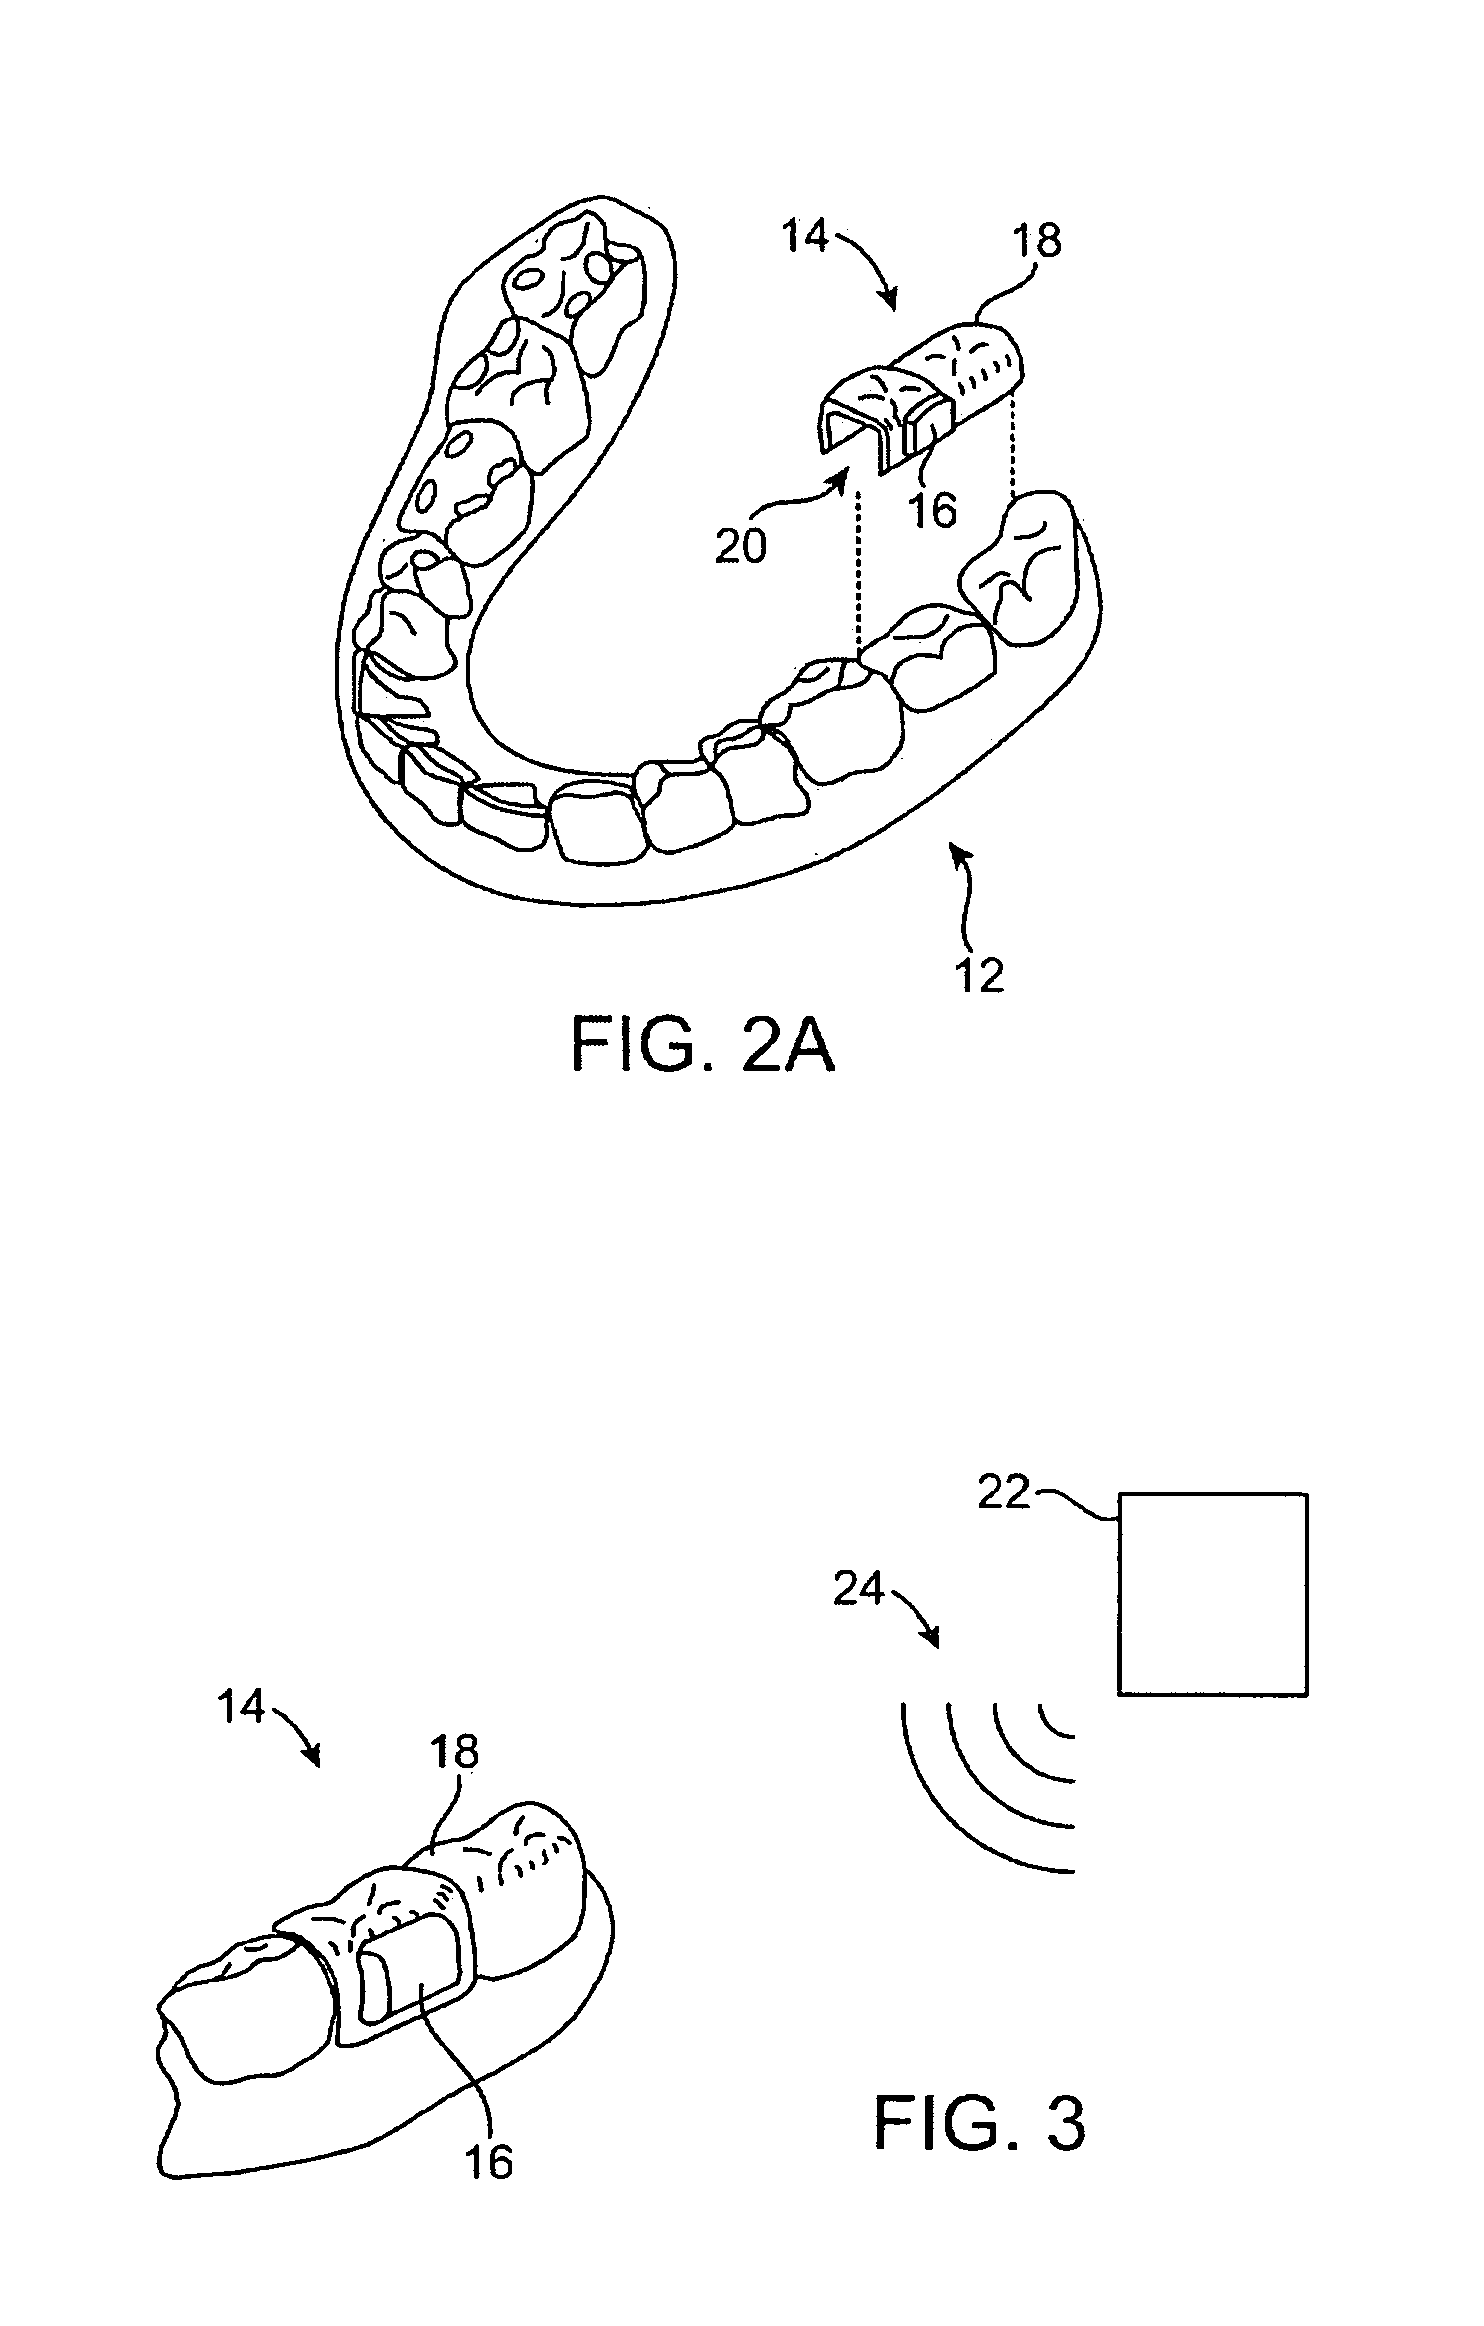 Systems for manufacturing oral-based hearing aid appliances